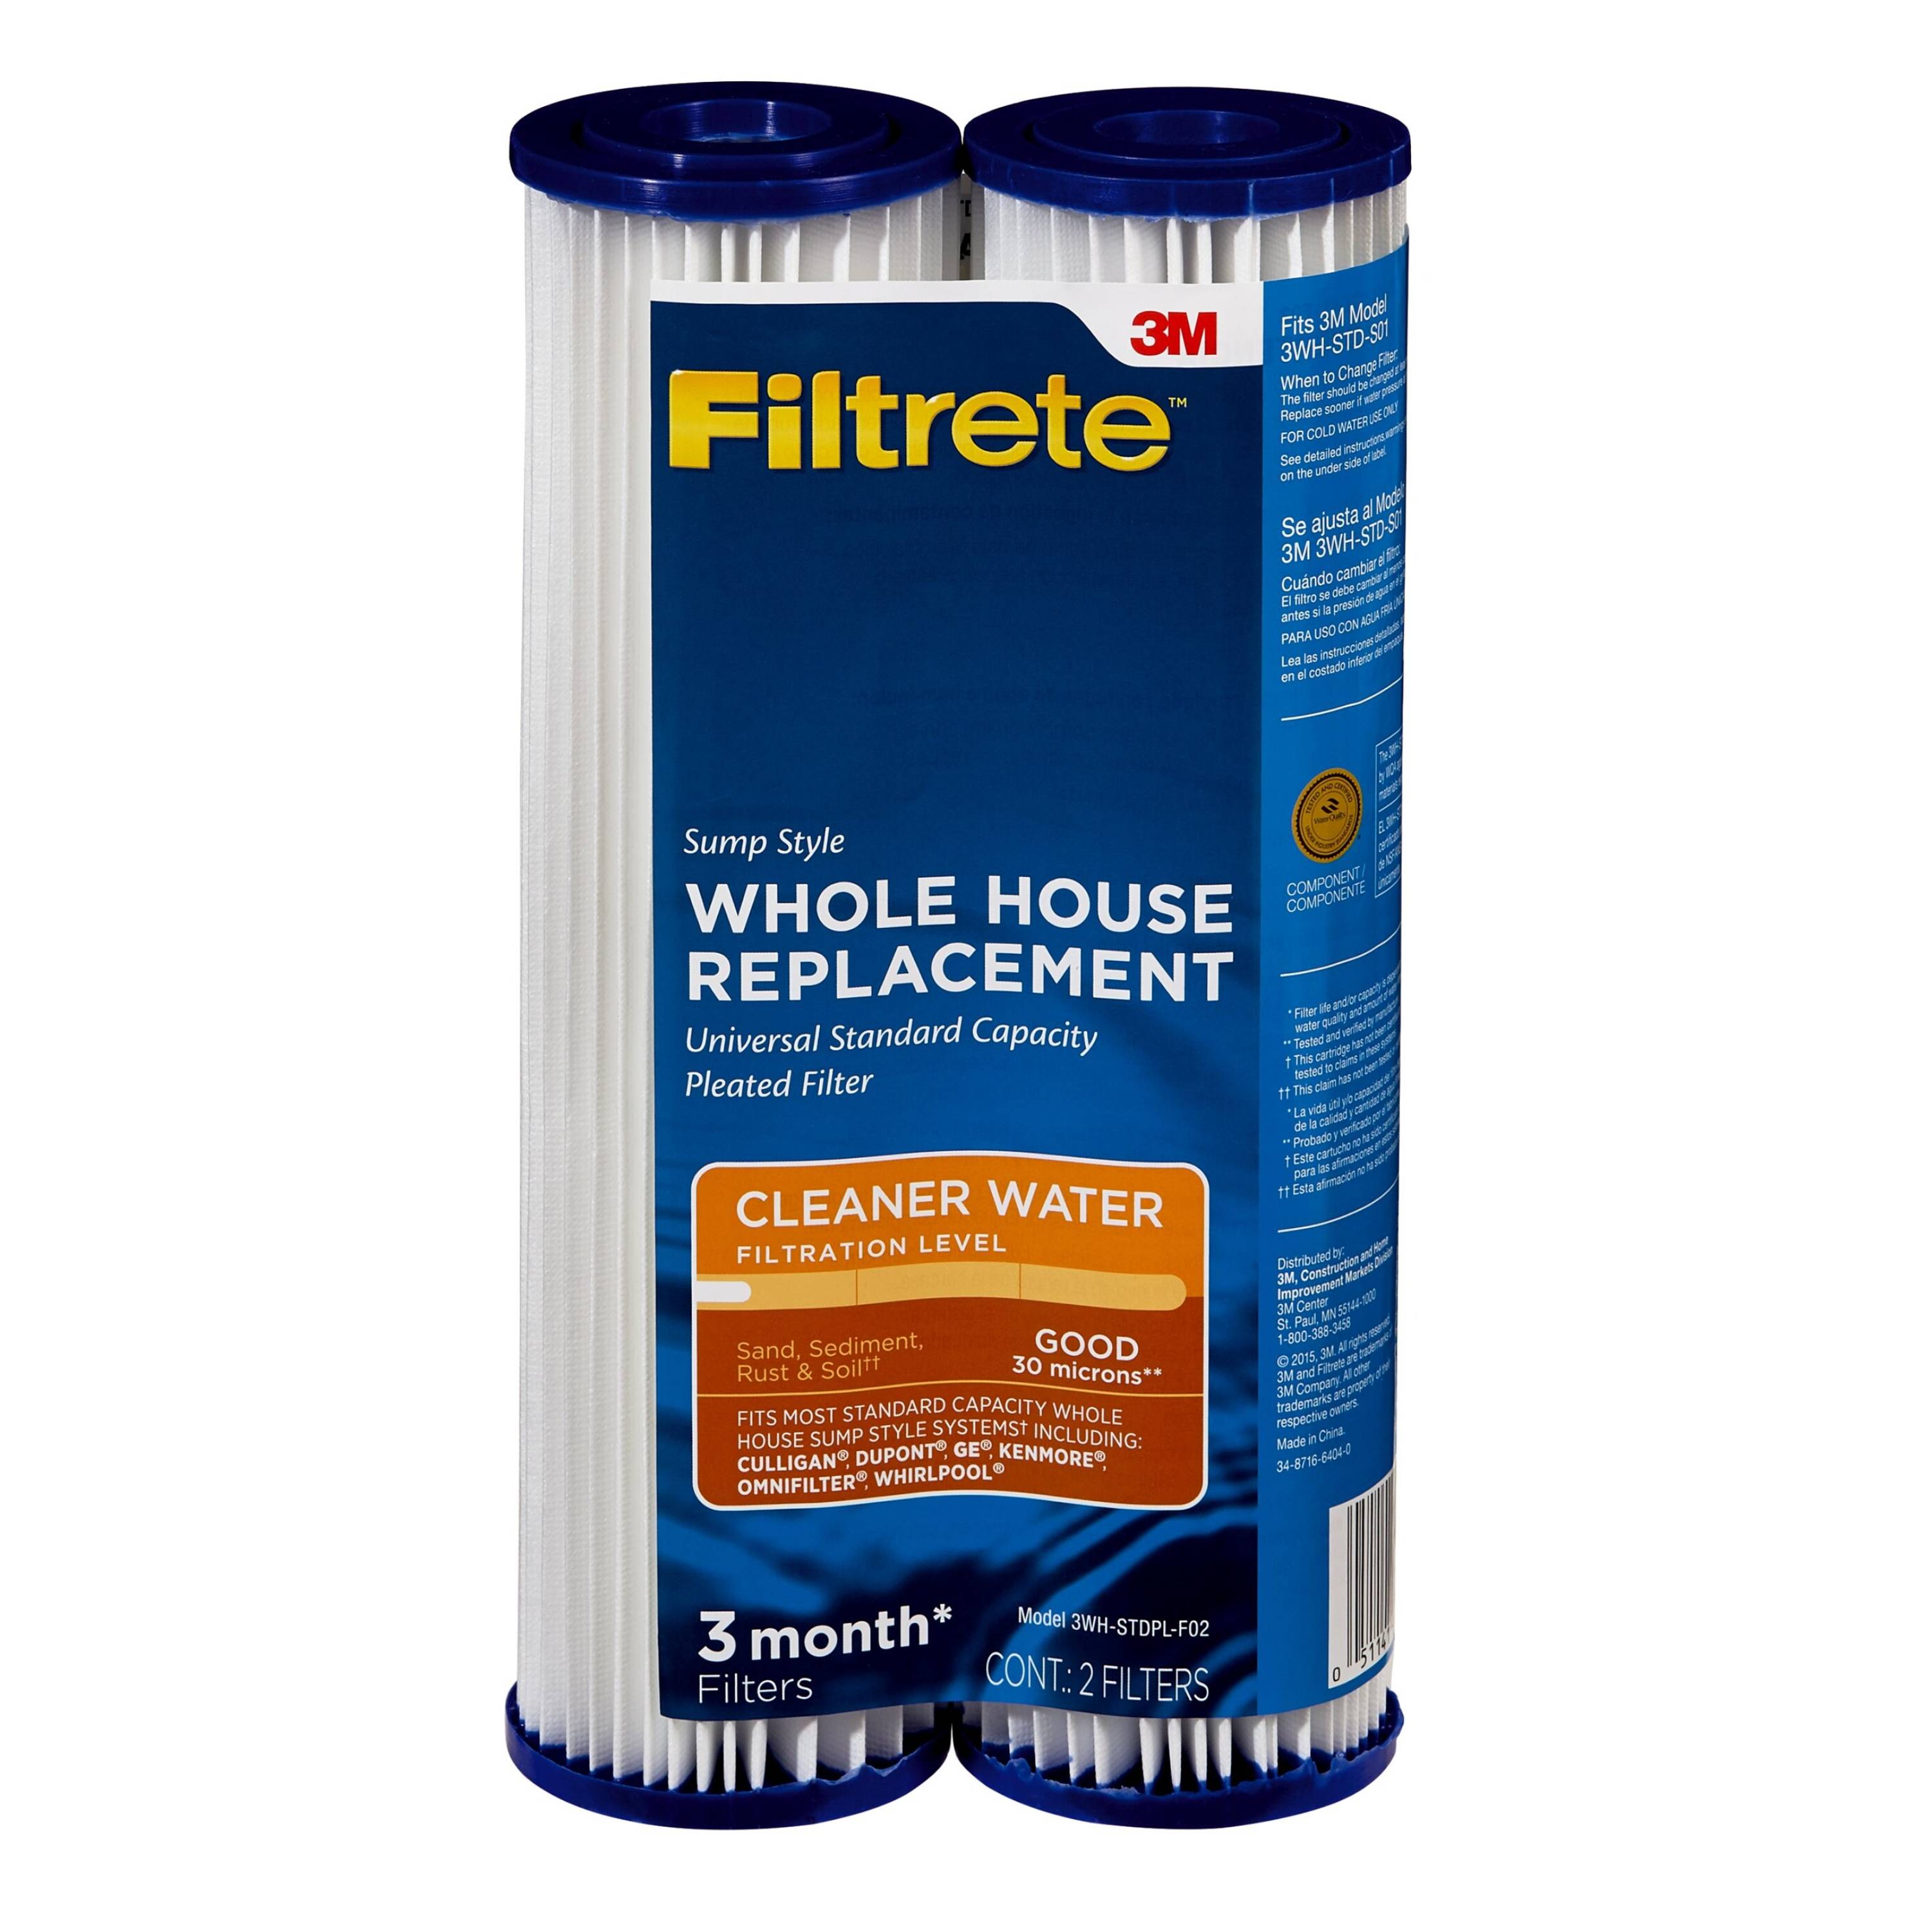 Filtrete Pleated 30 Micron Water Filters - 2-Pack